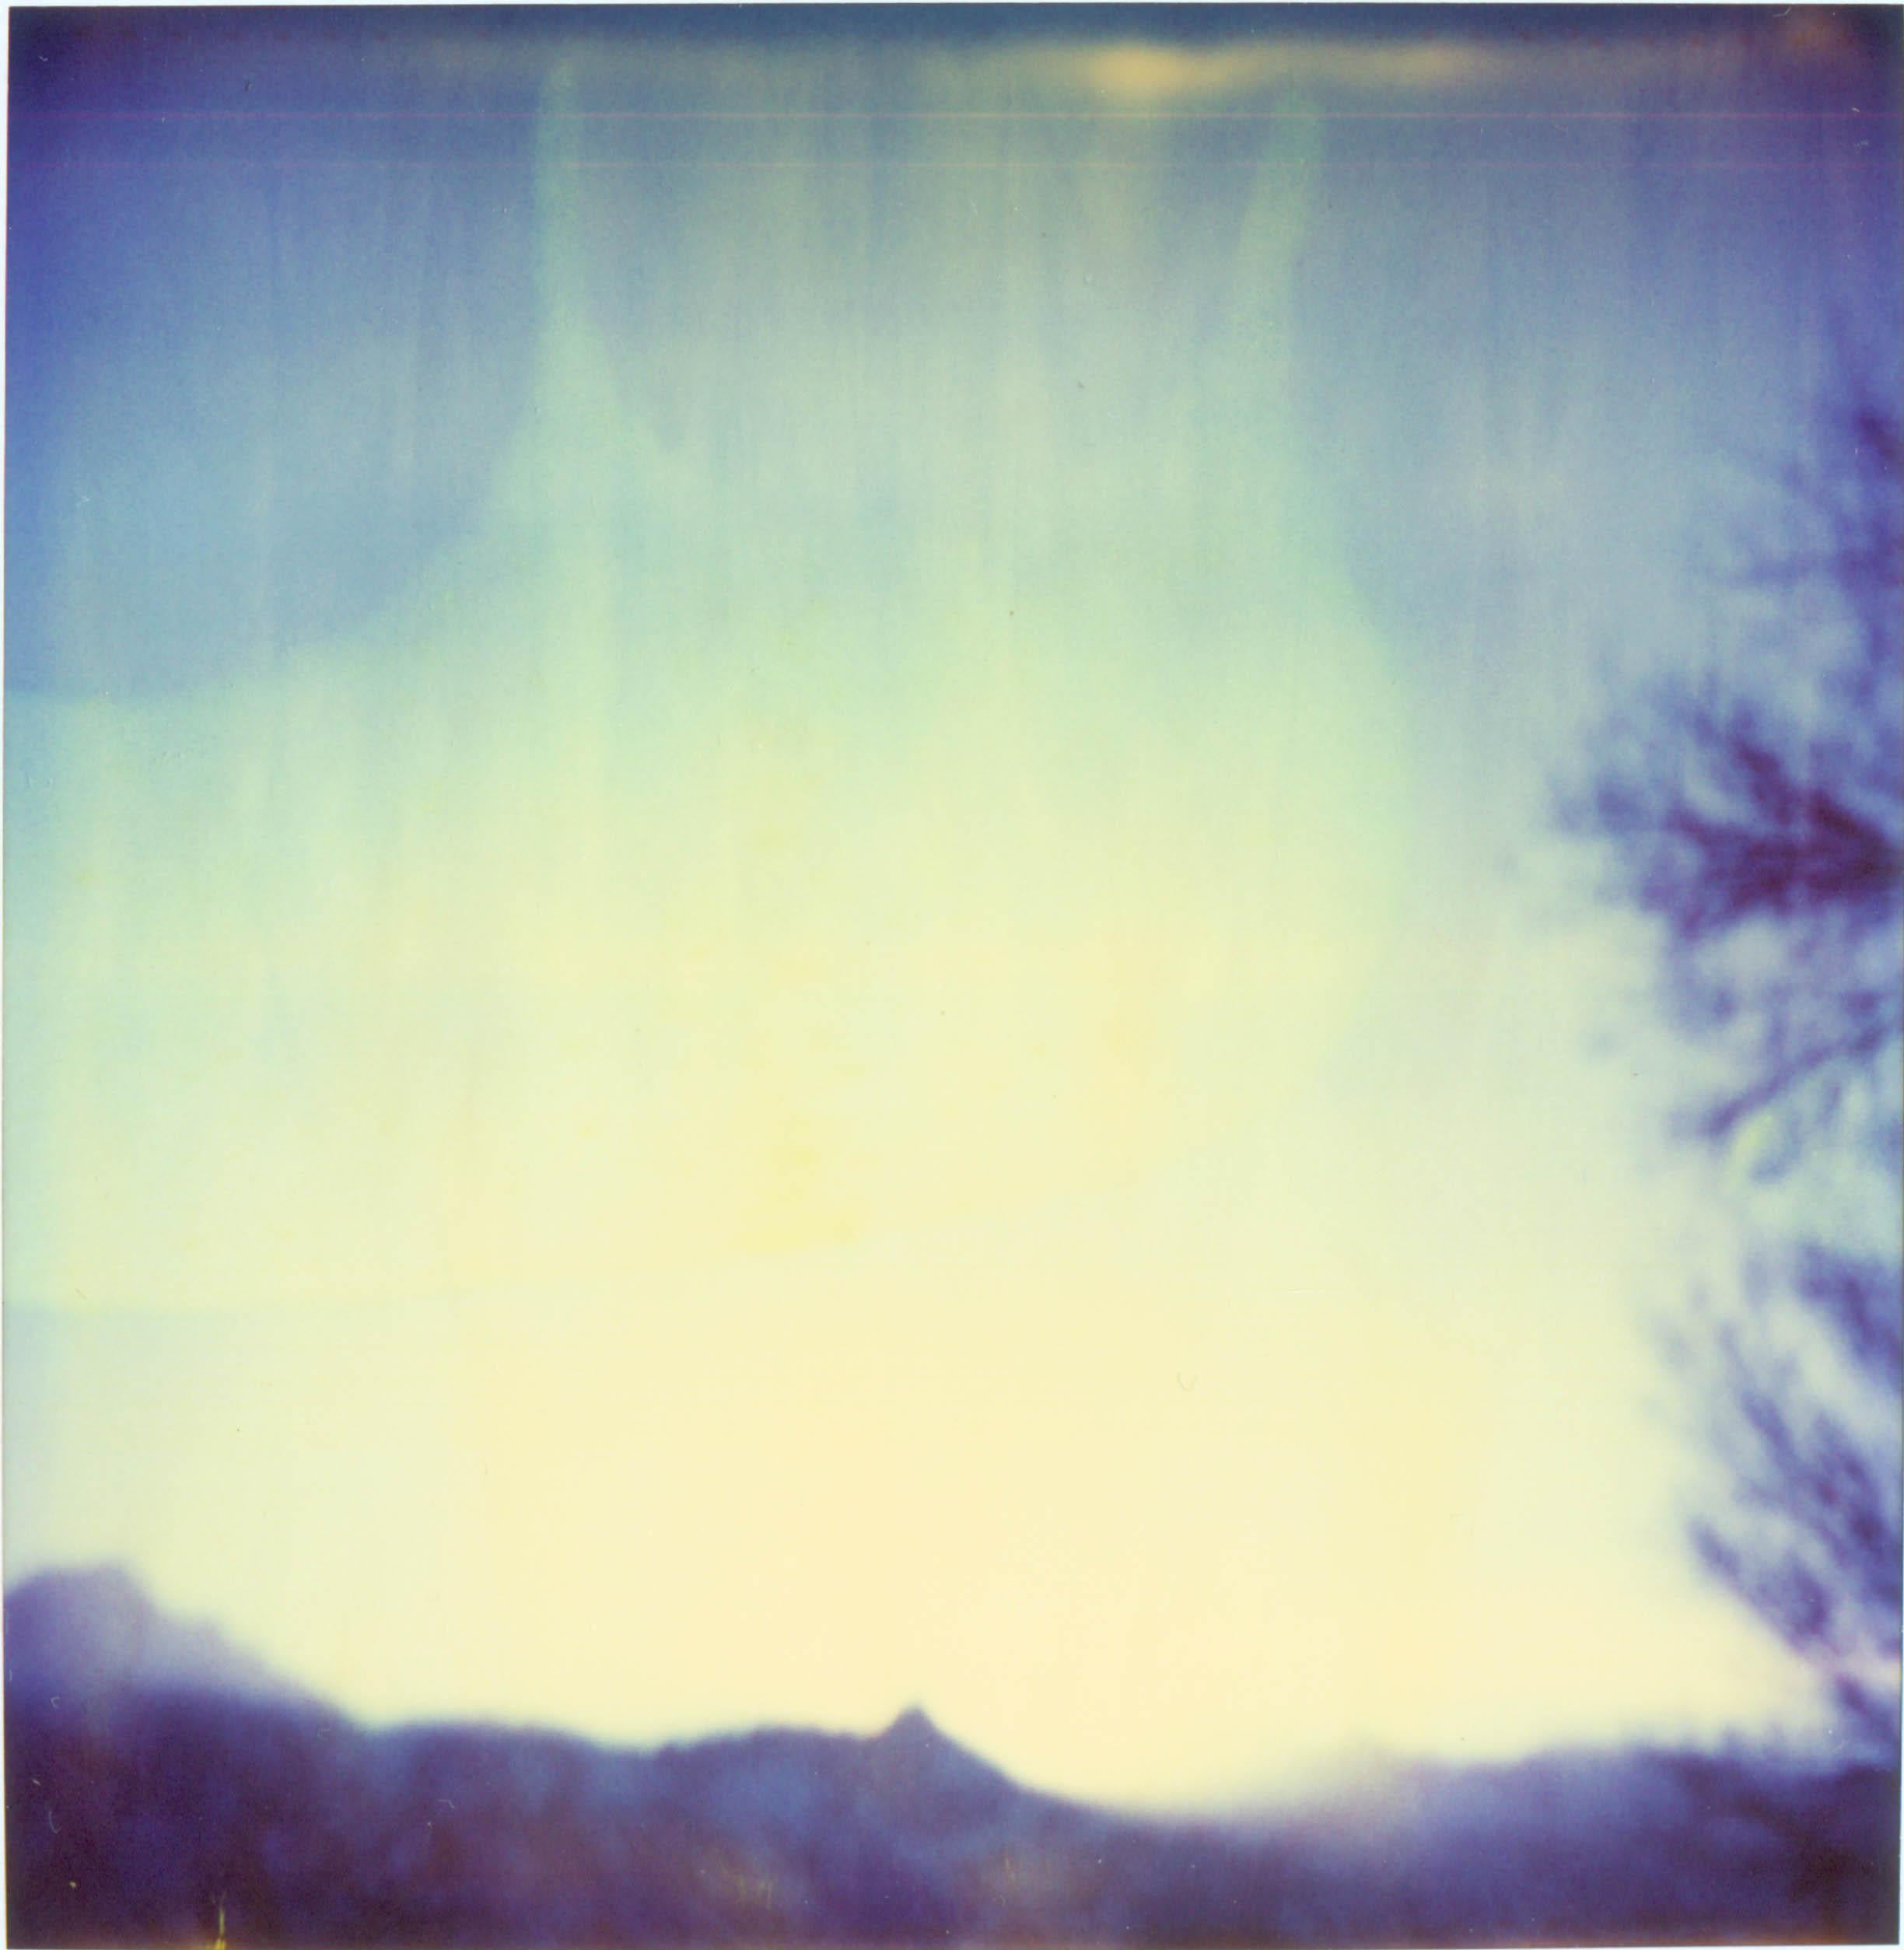 Lone Pine Dreaming (The Last Picture Show) - analog, mounted, Polaroid - Contemporary Photograph by Stefanie Schneider